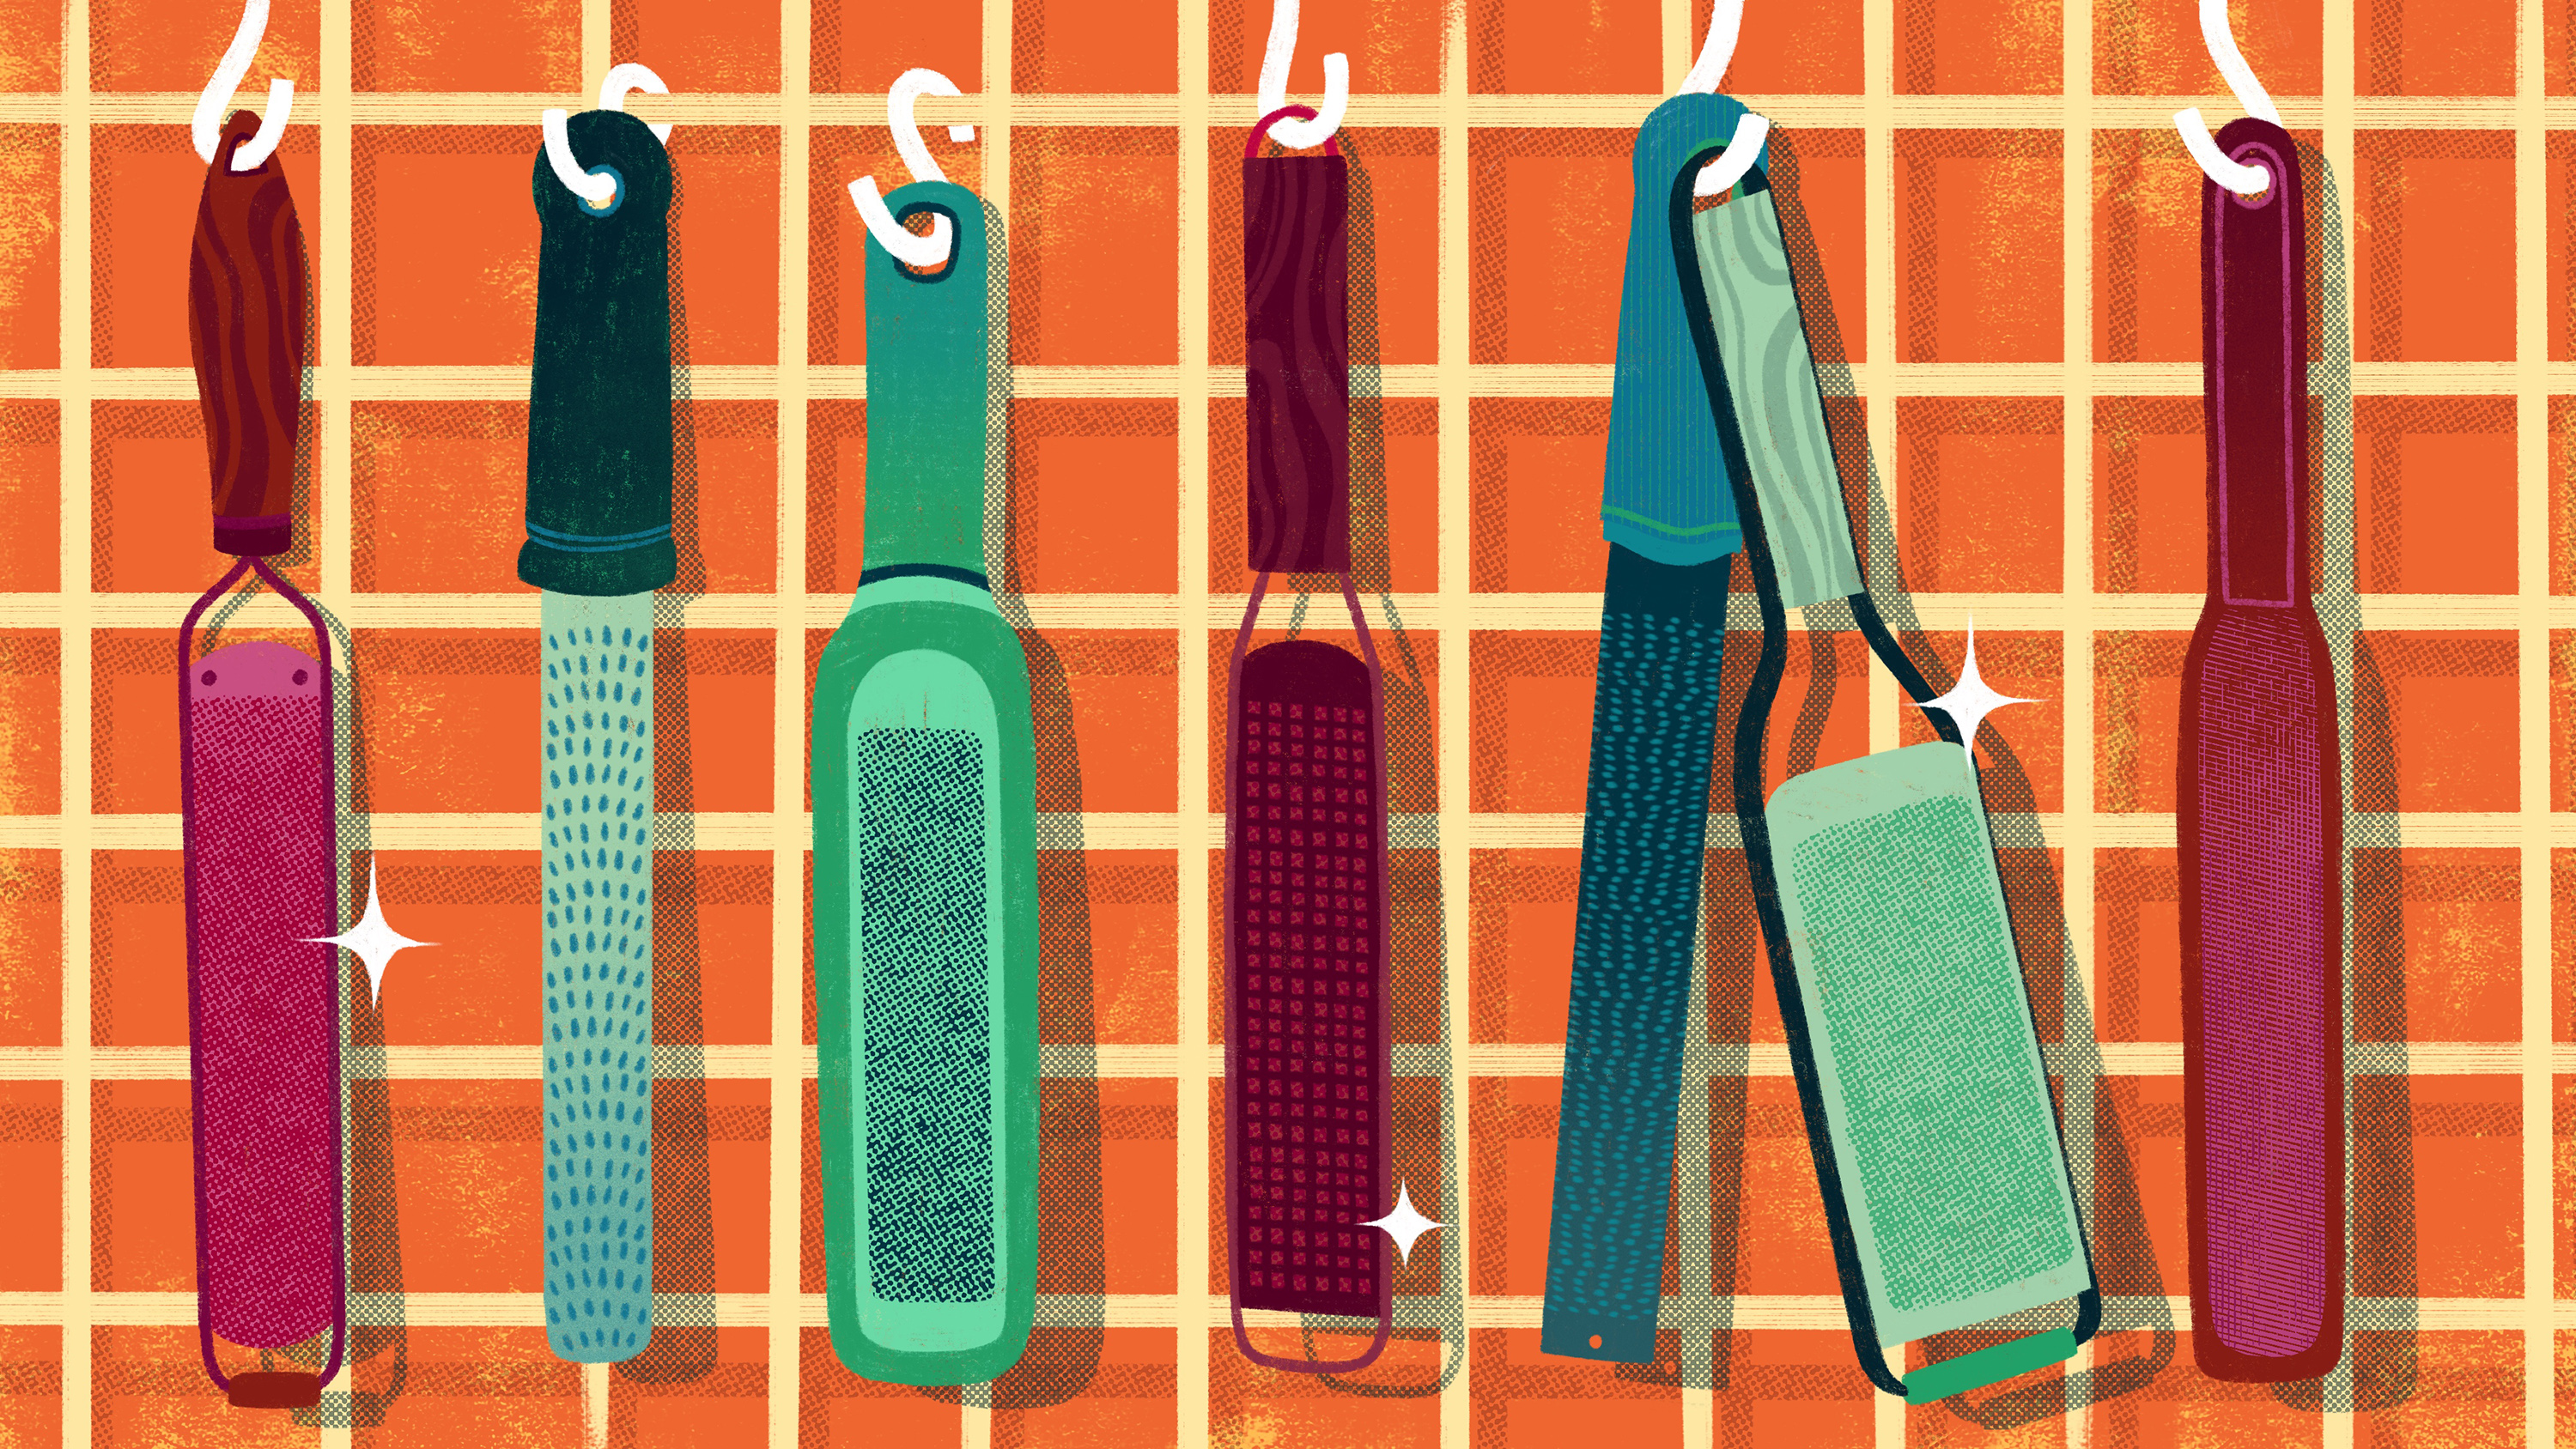 Different styles of Microplane zesters hang on hooks on an orange-tiled wall. Illustration.